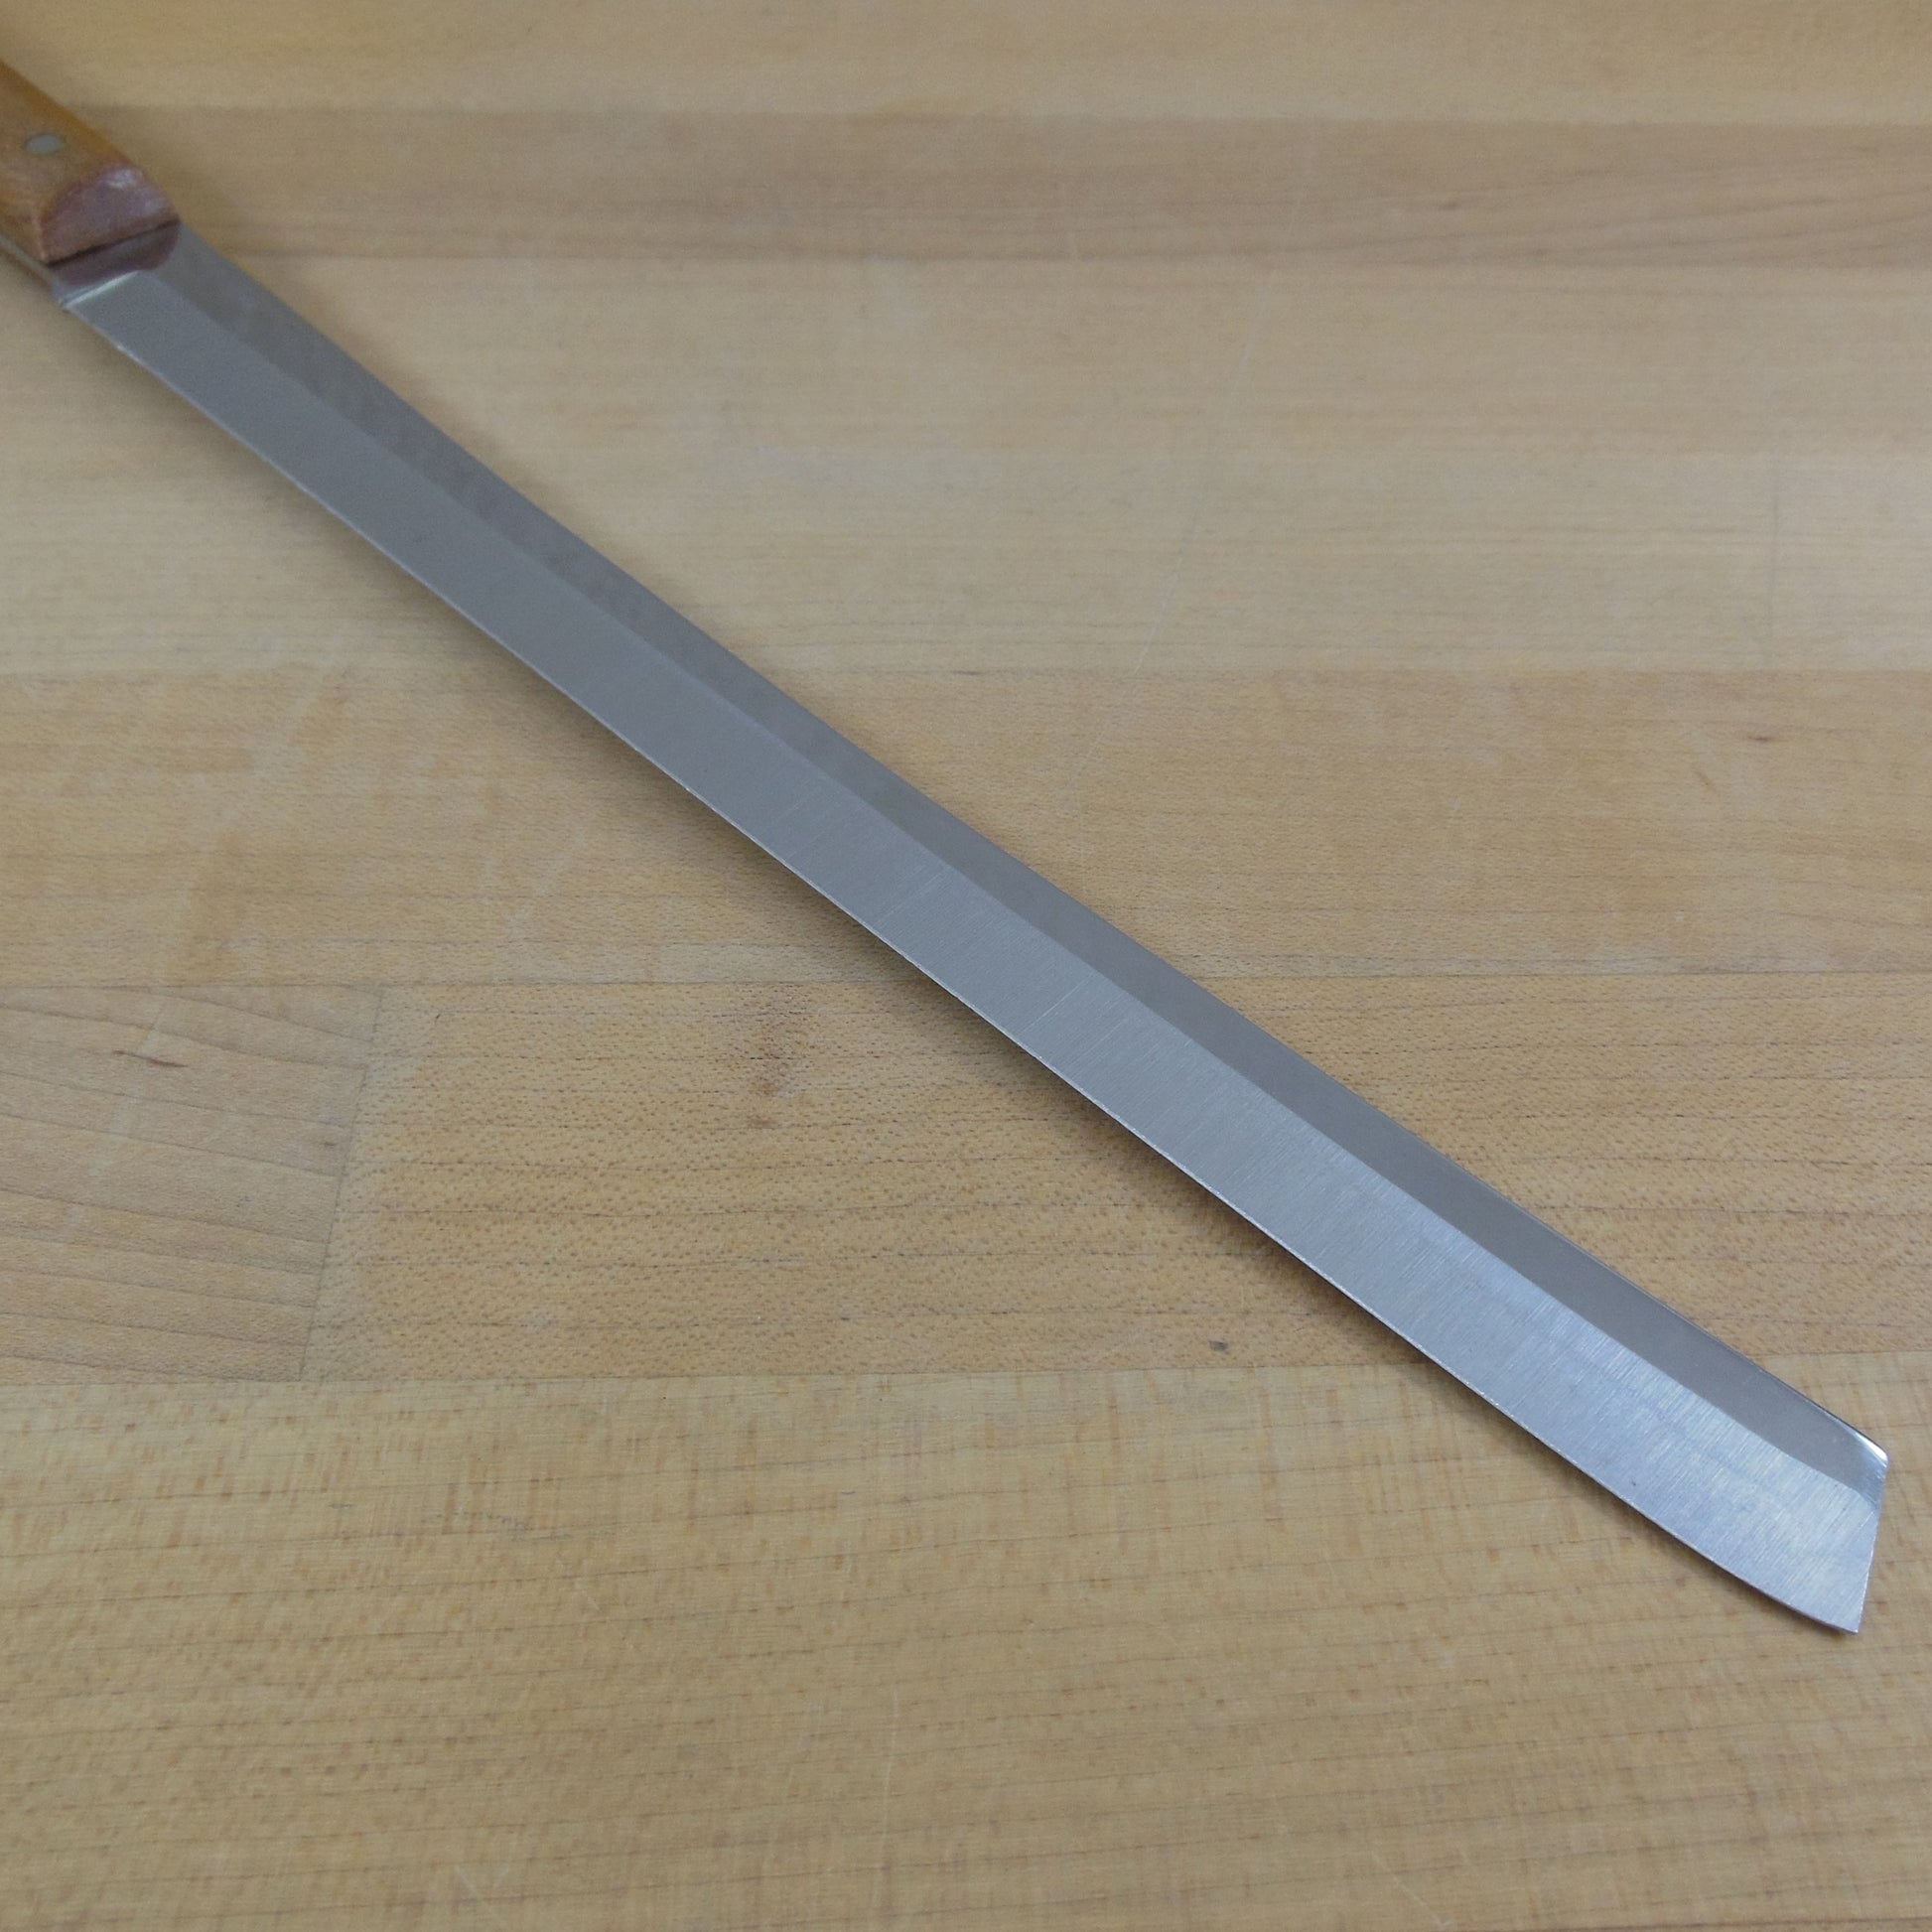 Triple 'C' Cutlery USA Stainless 9.5" Slicing Carving Knife Vintage